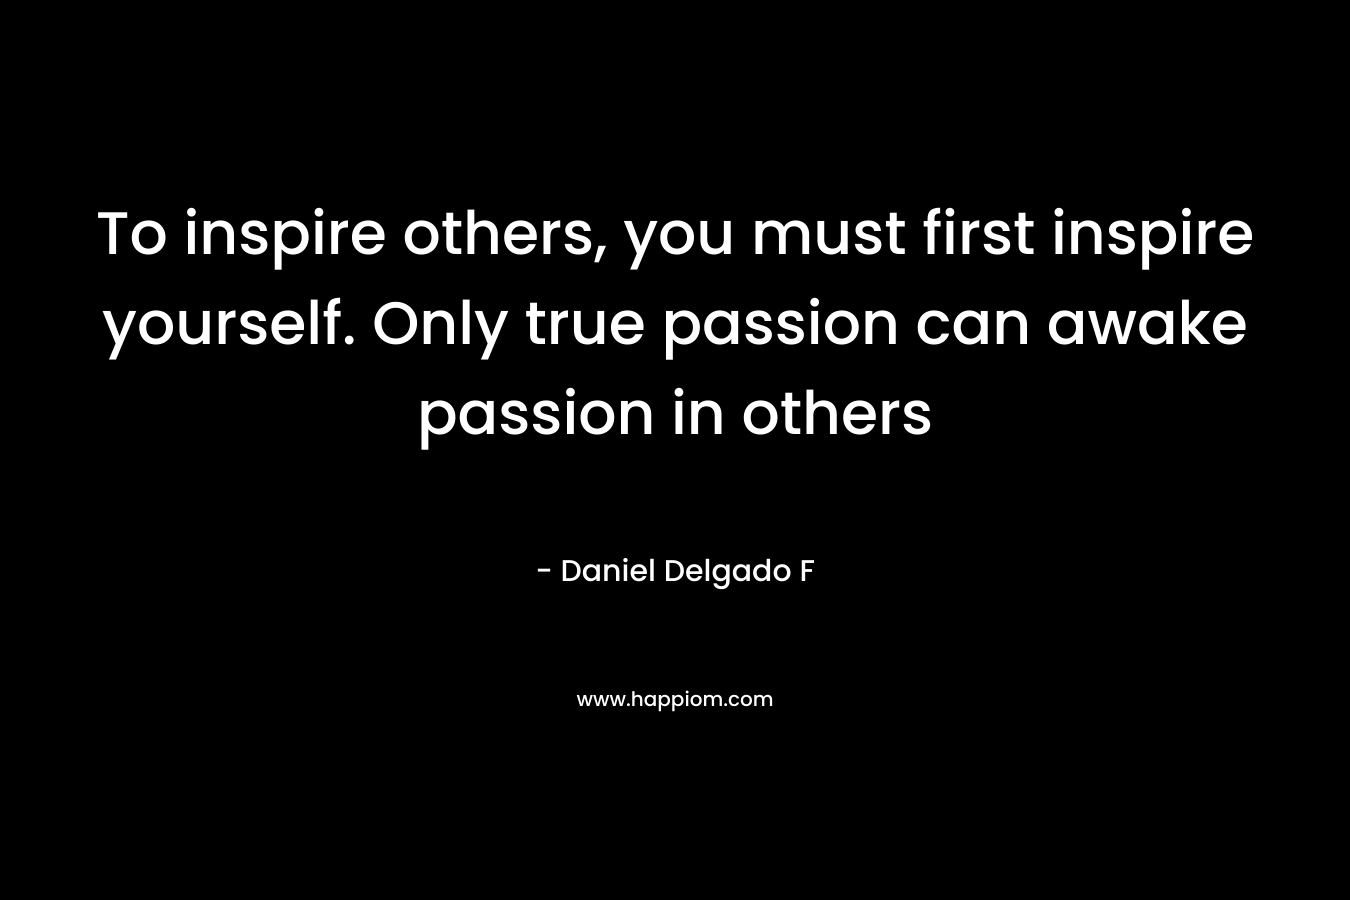 To inspire others, you must first inspire yourself. Only true passion can awake passion in others